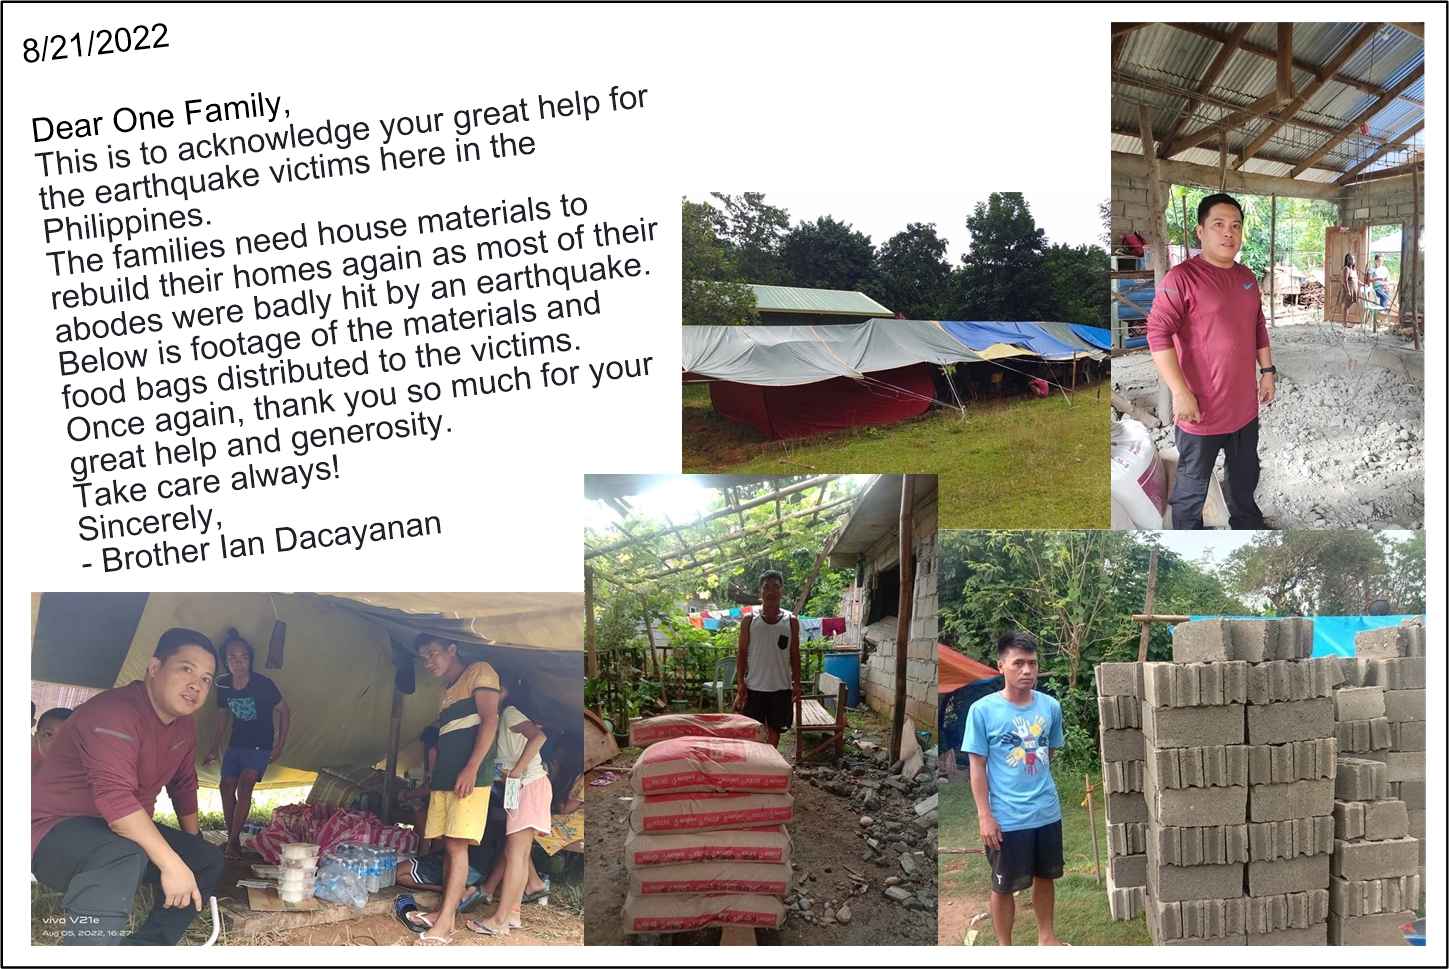 Providing food and building materials to help earthquake victims in the Philippines